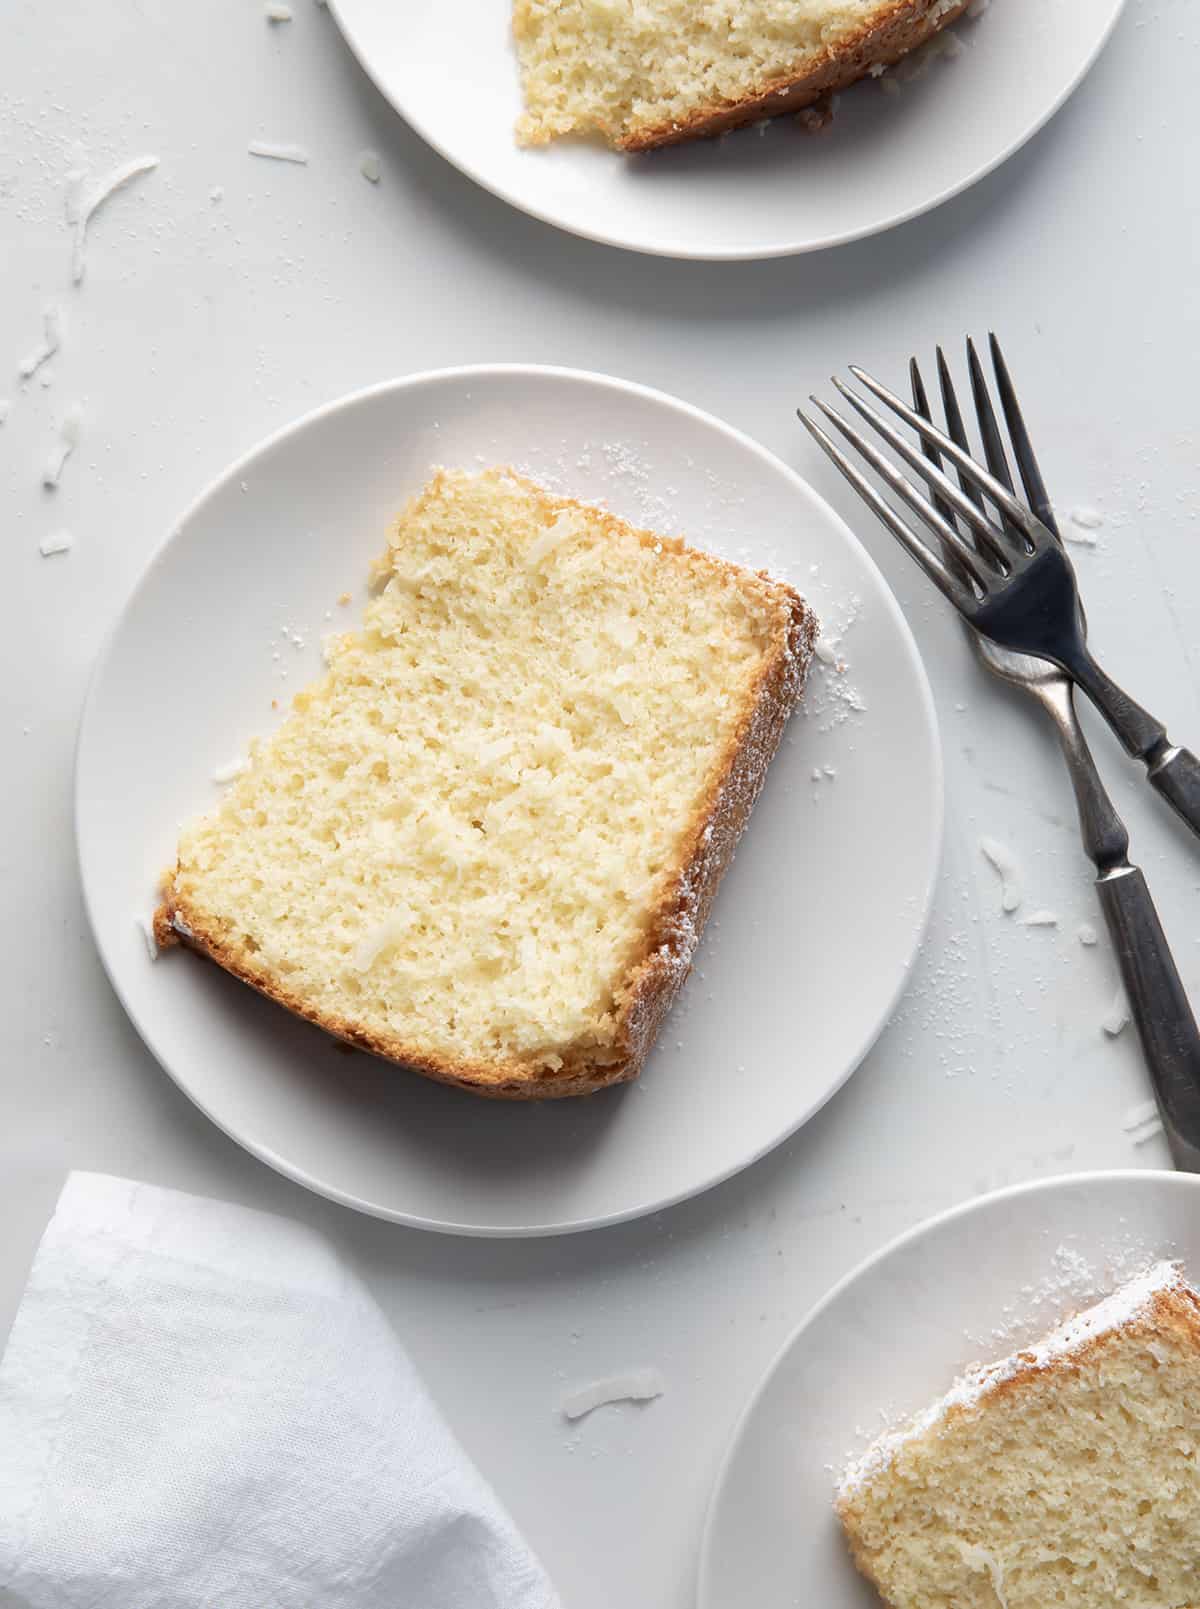 Slices of Coconut Chiffon Cake on white plates on a white table from overhead.